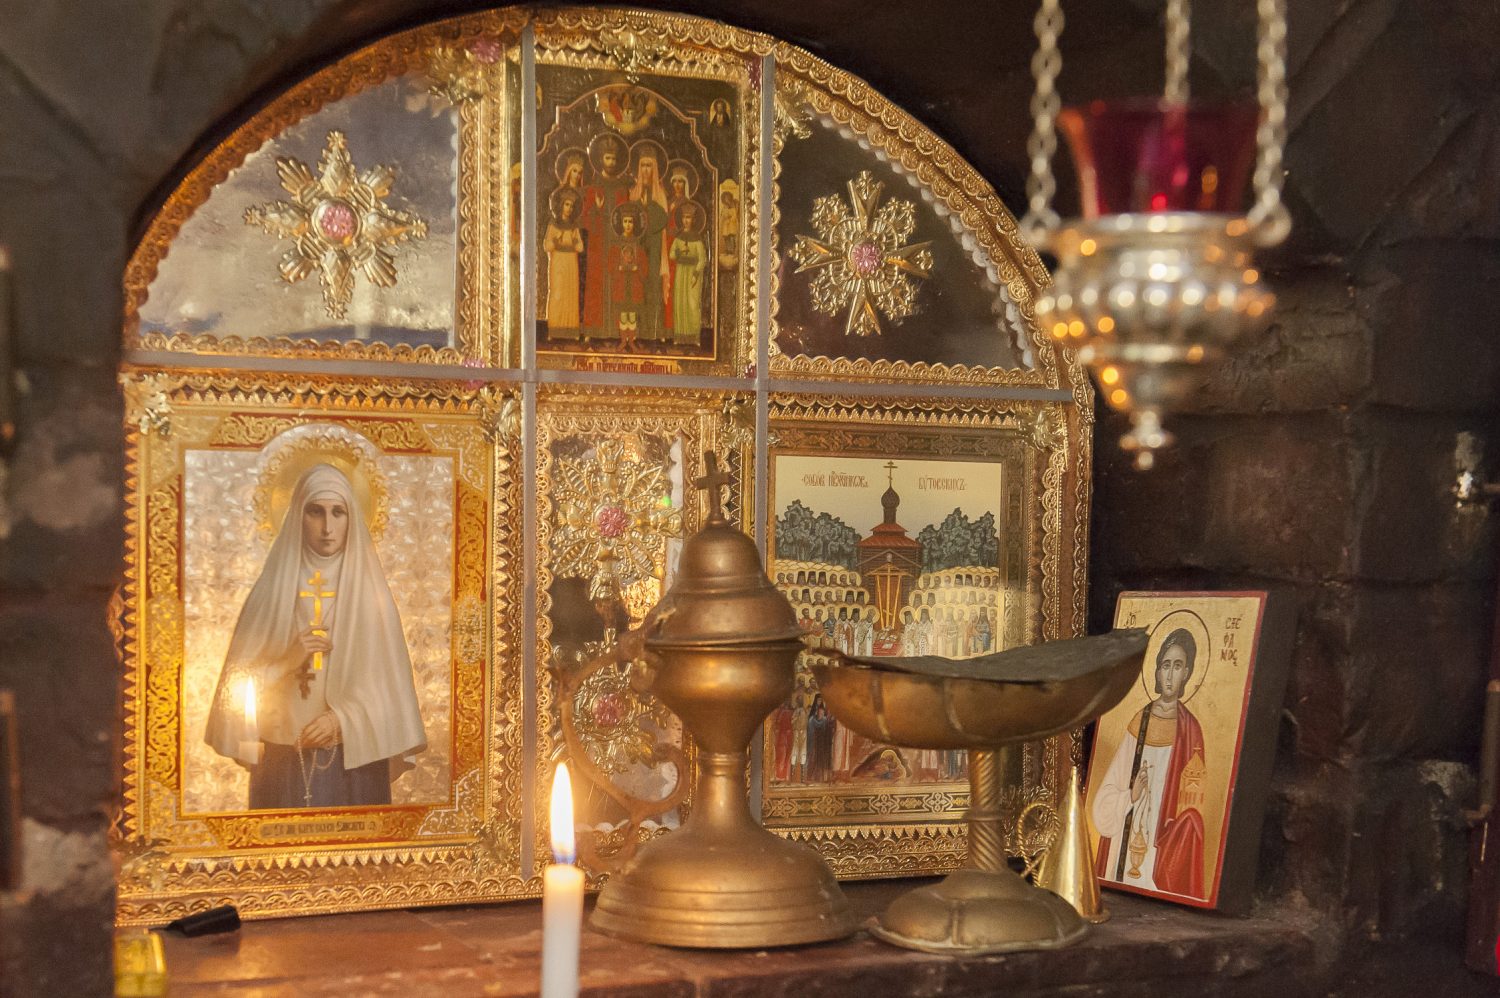 At the rear of the garden, Paul and Stephen have built a tiny and exquisite chapel in the Orthodox style, where mass is sometimes said. With painted angels on a rich blue ground, a wealth of icons, censers, reliquaries and a central Madonna and Child, it’s so beautiful and surprising